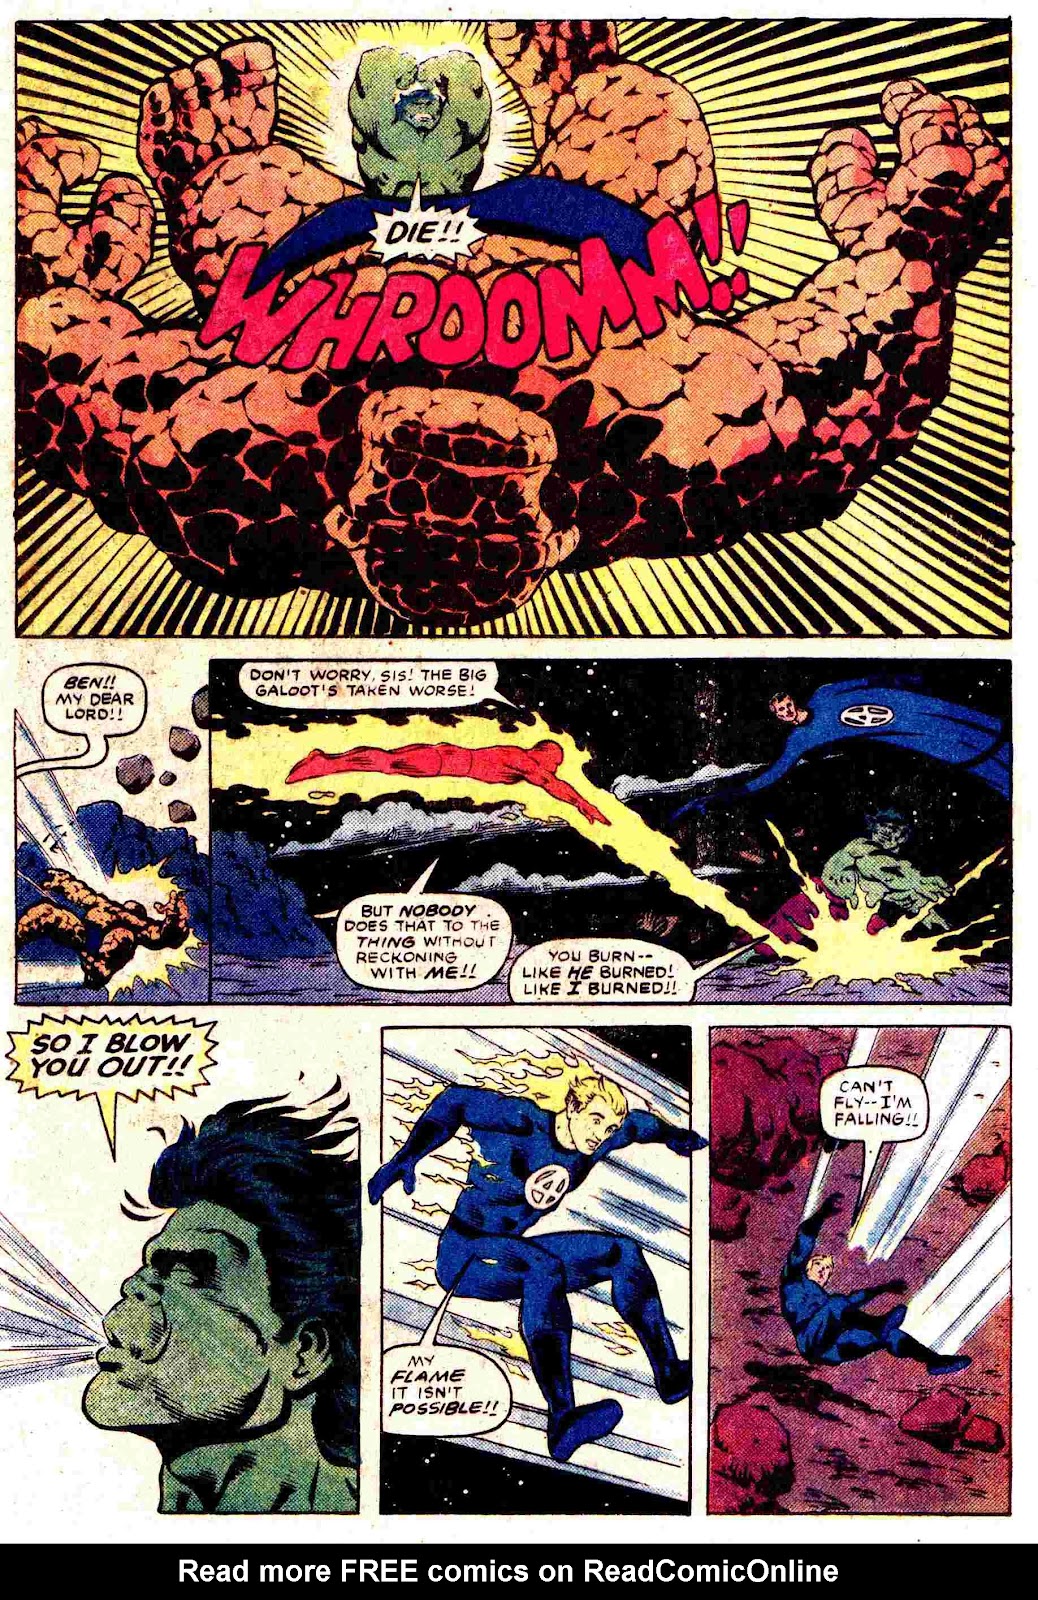 What If? (1977) issue 45 - The Hulk went Berserk - Page 32